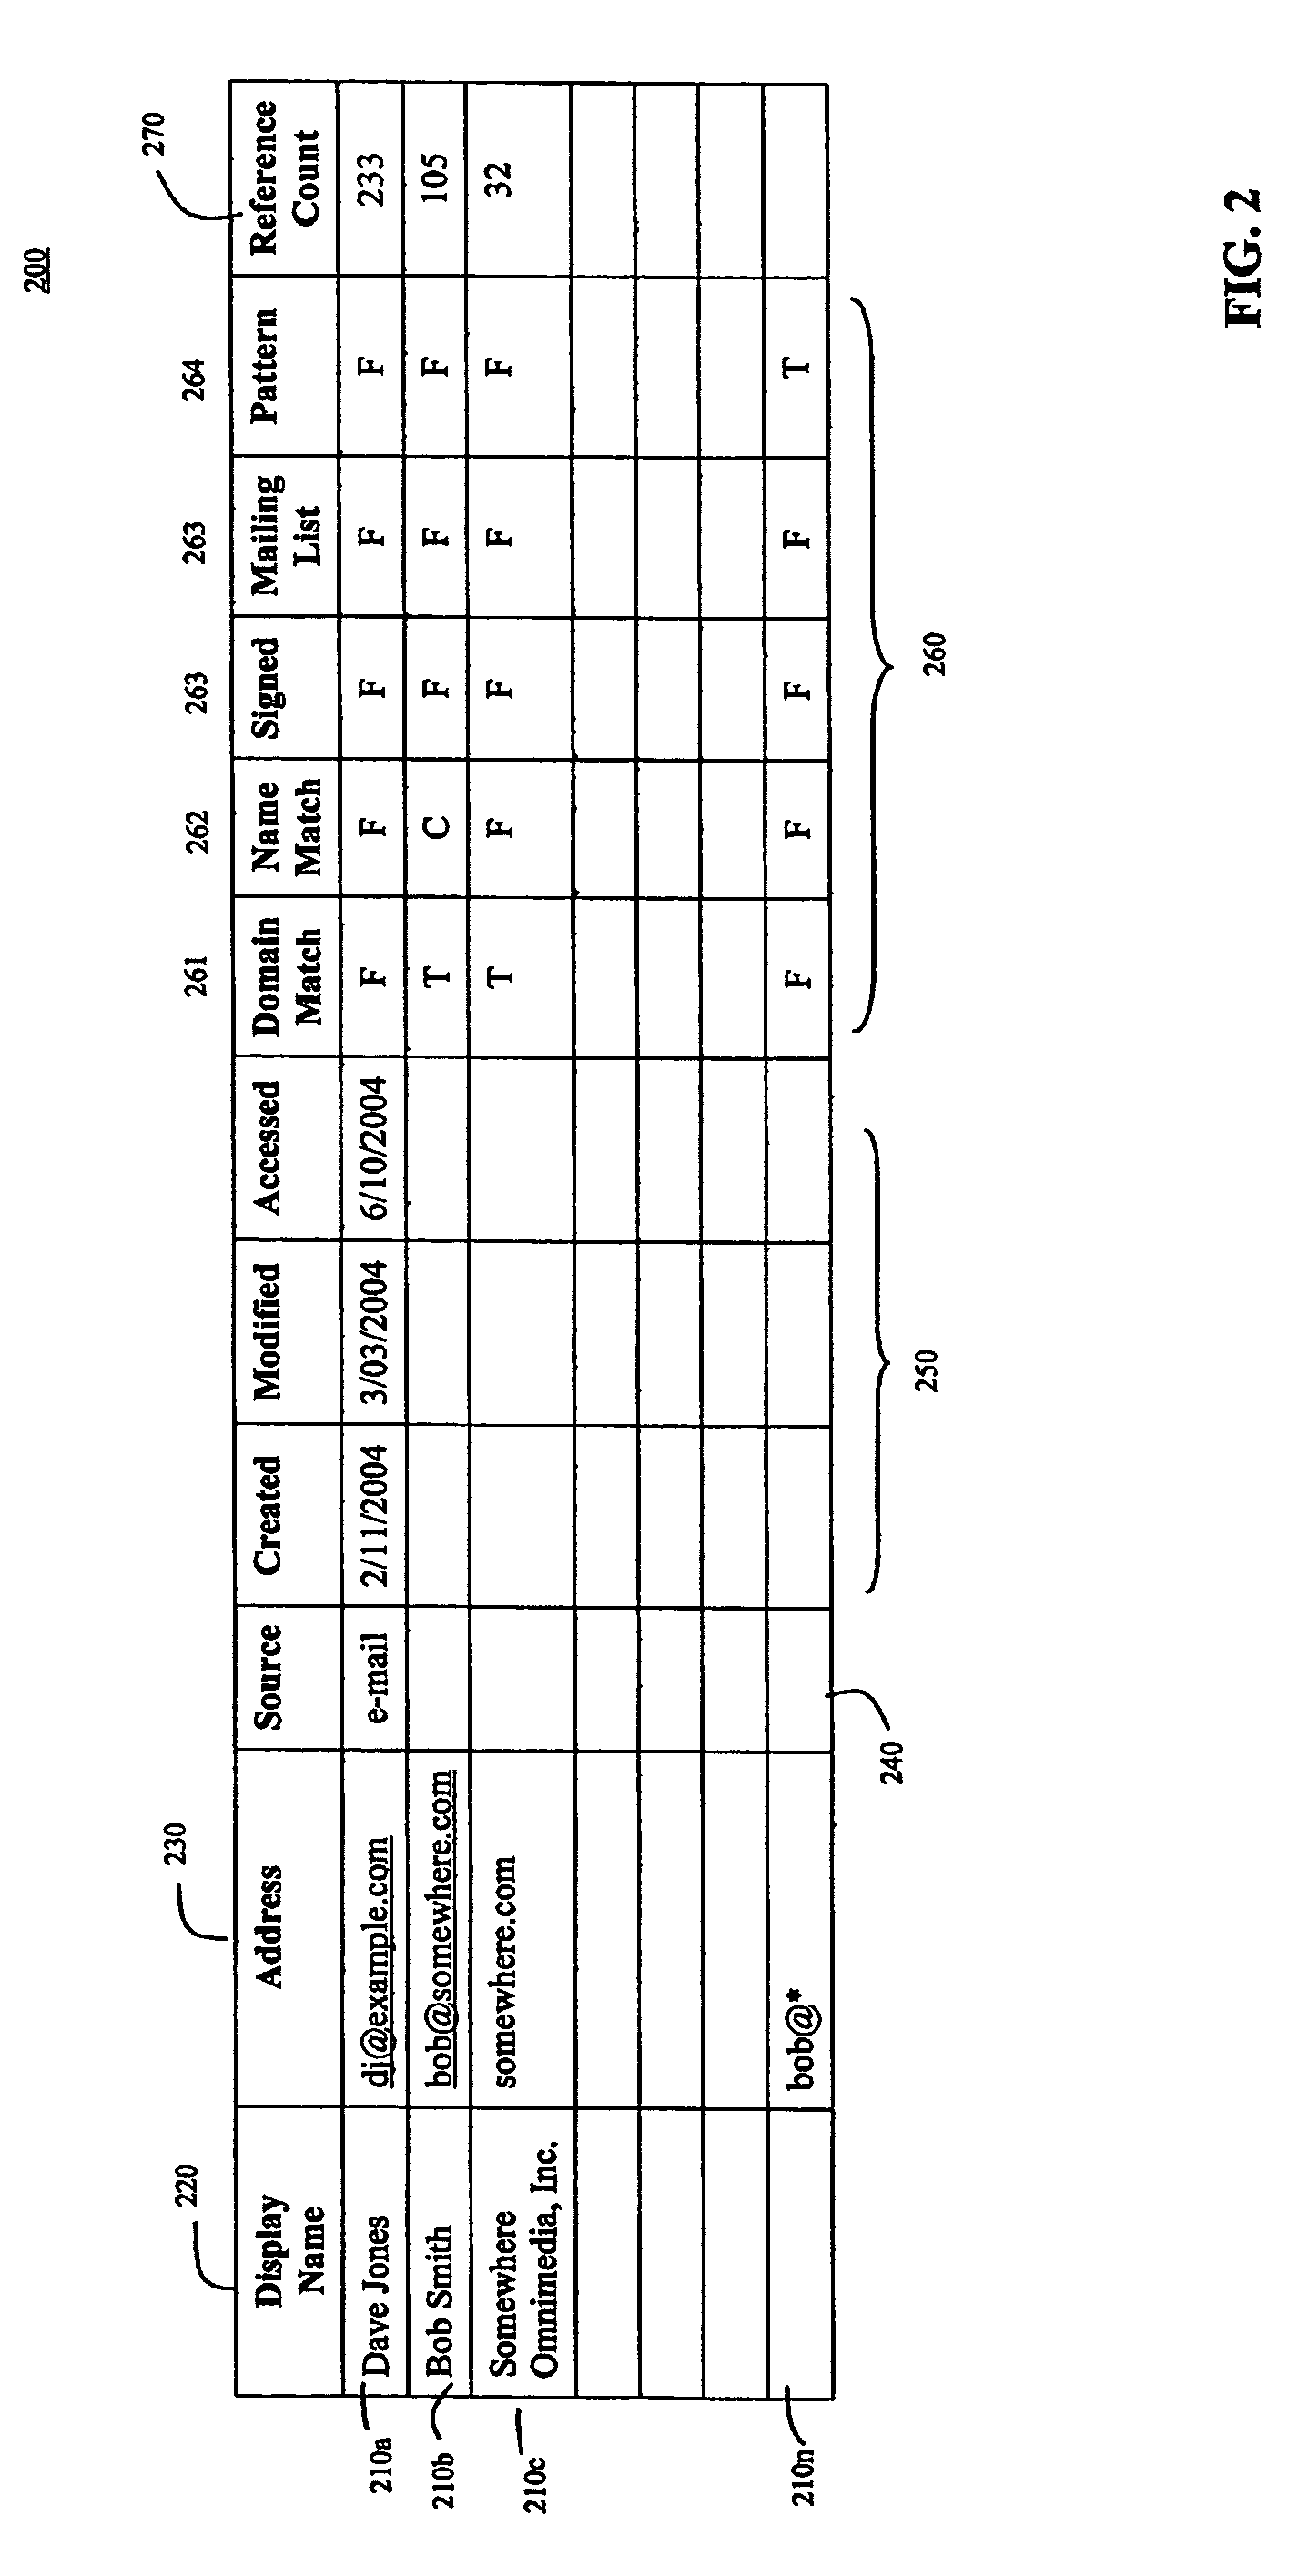 System, method, and computer program product for filtering messages and training a classification module